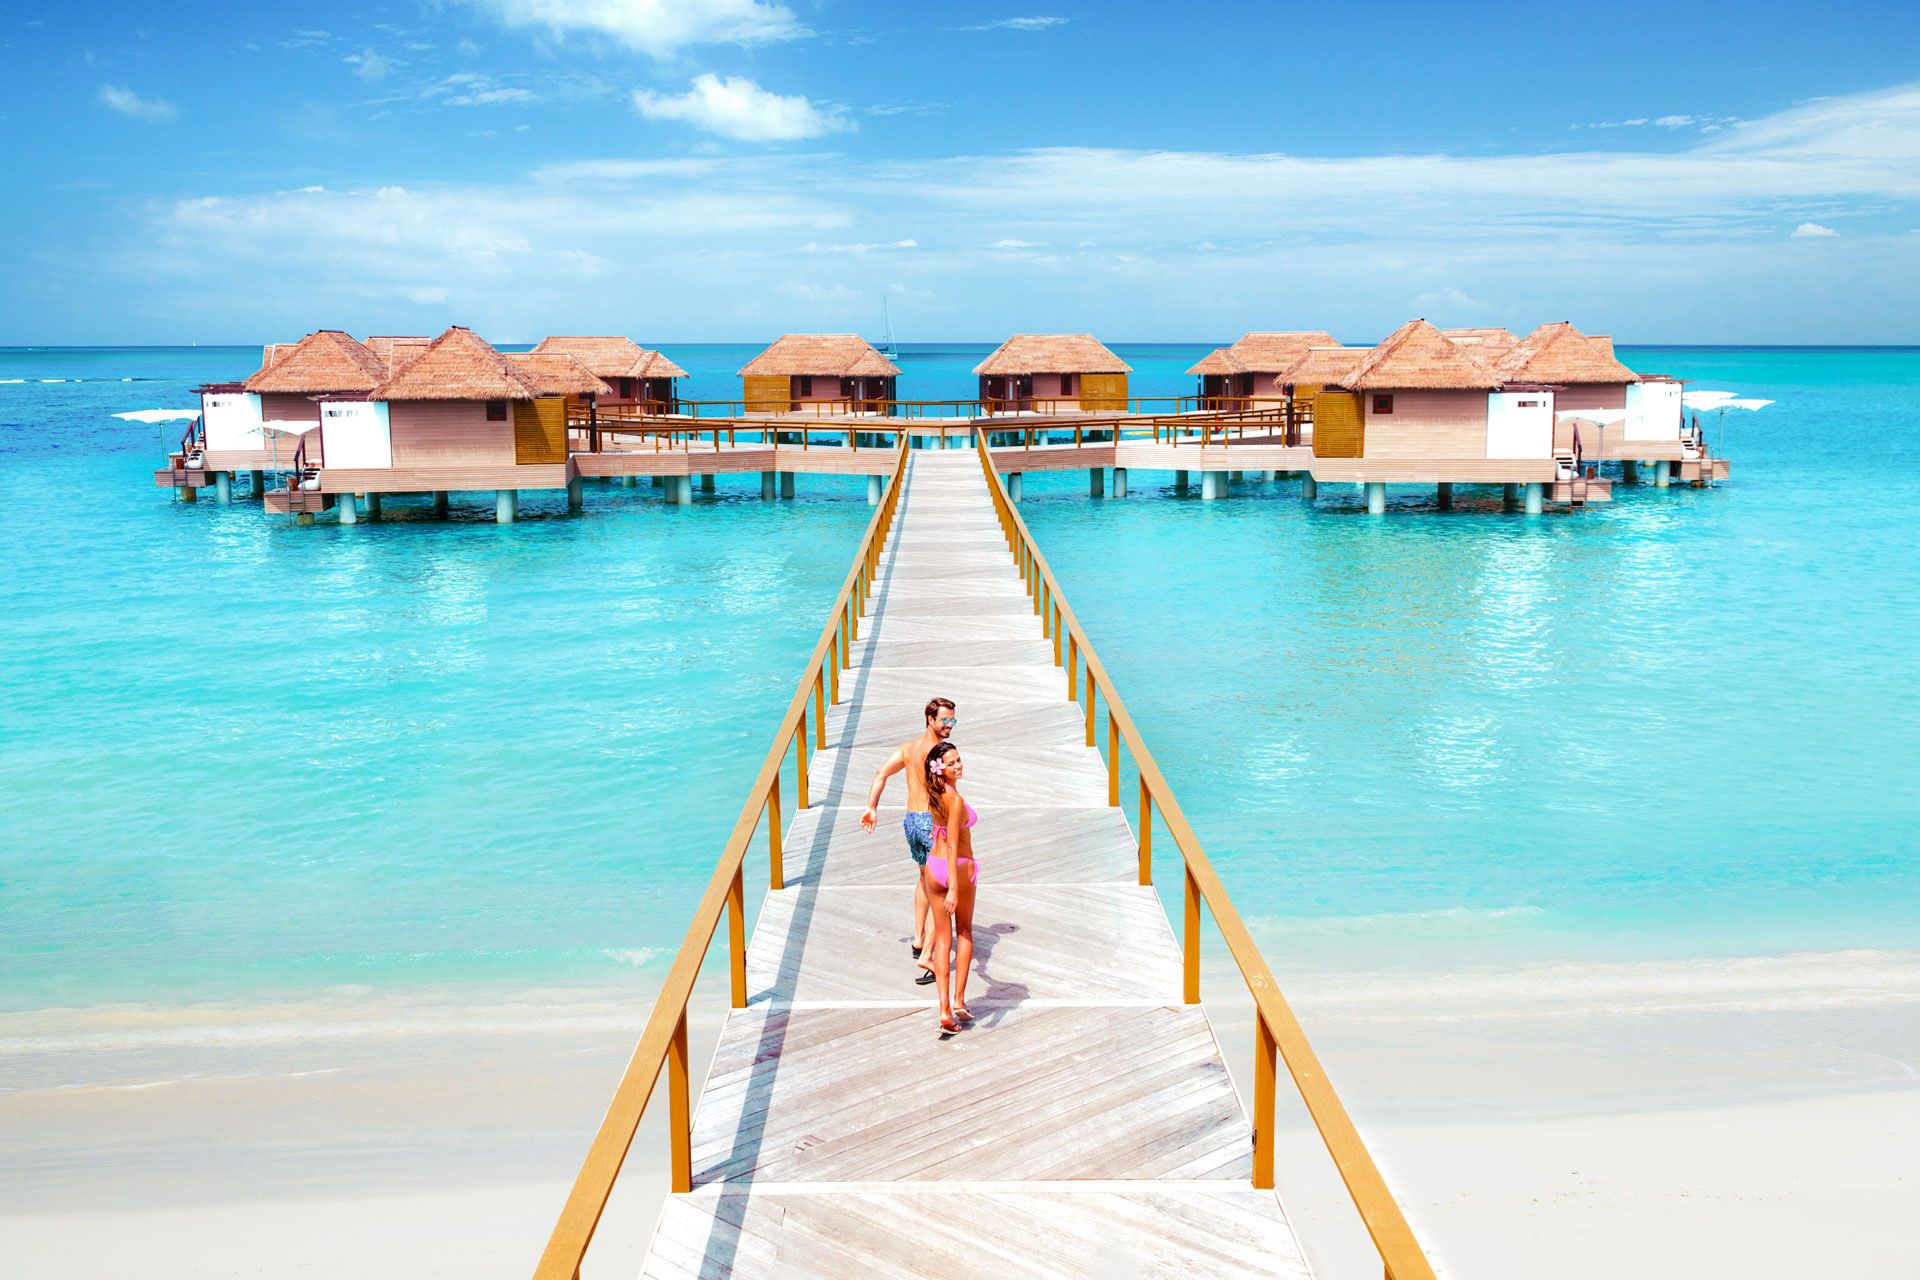 Couple at Sandals overwater bungalows